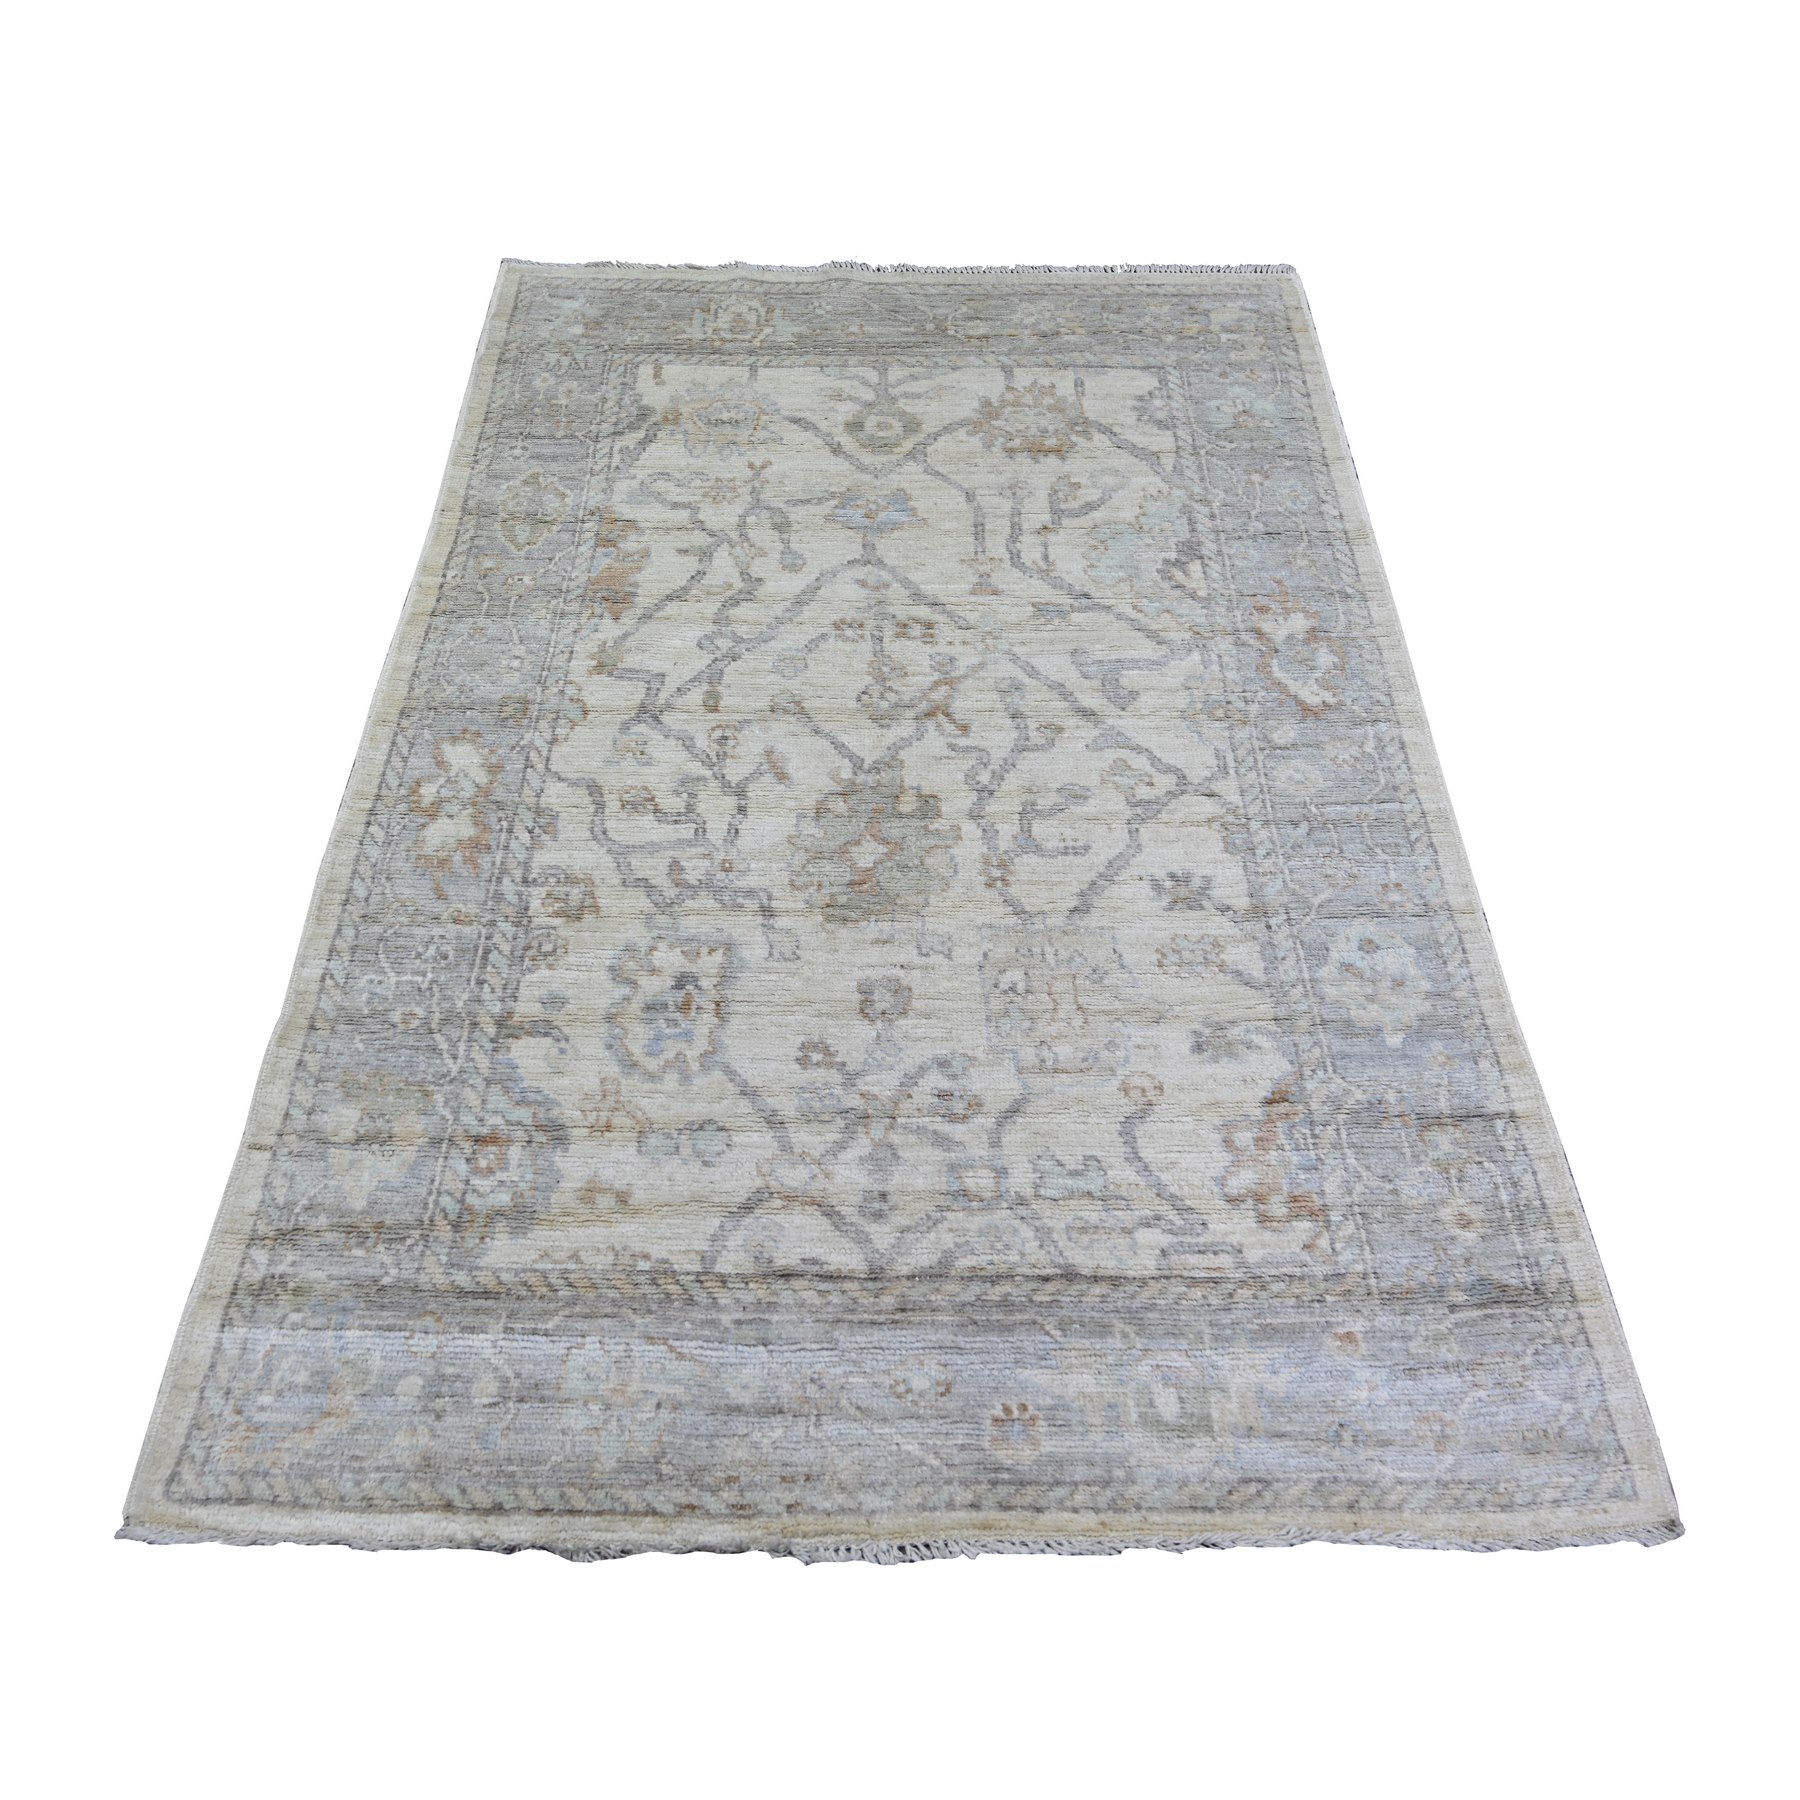 4'x6'1" Ivory, Hand Woven Afghan Angora Oushak with All Over Design, Vegetable Dyes Organic Wool, Oriental Rug 